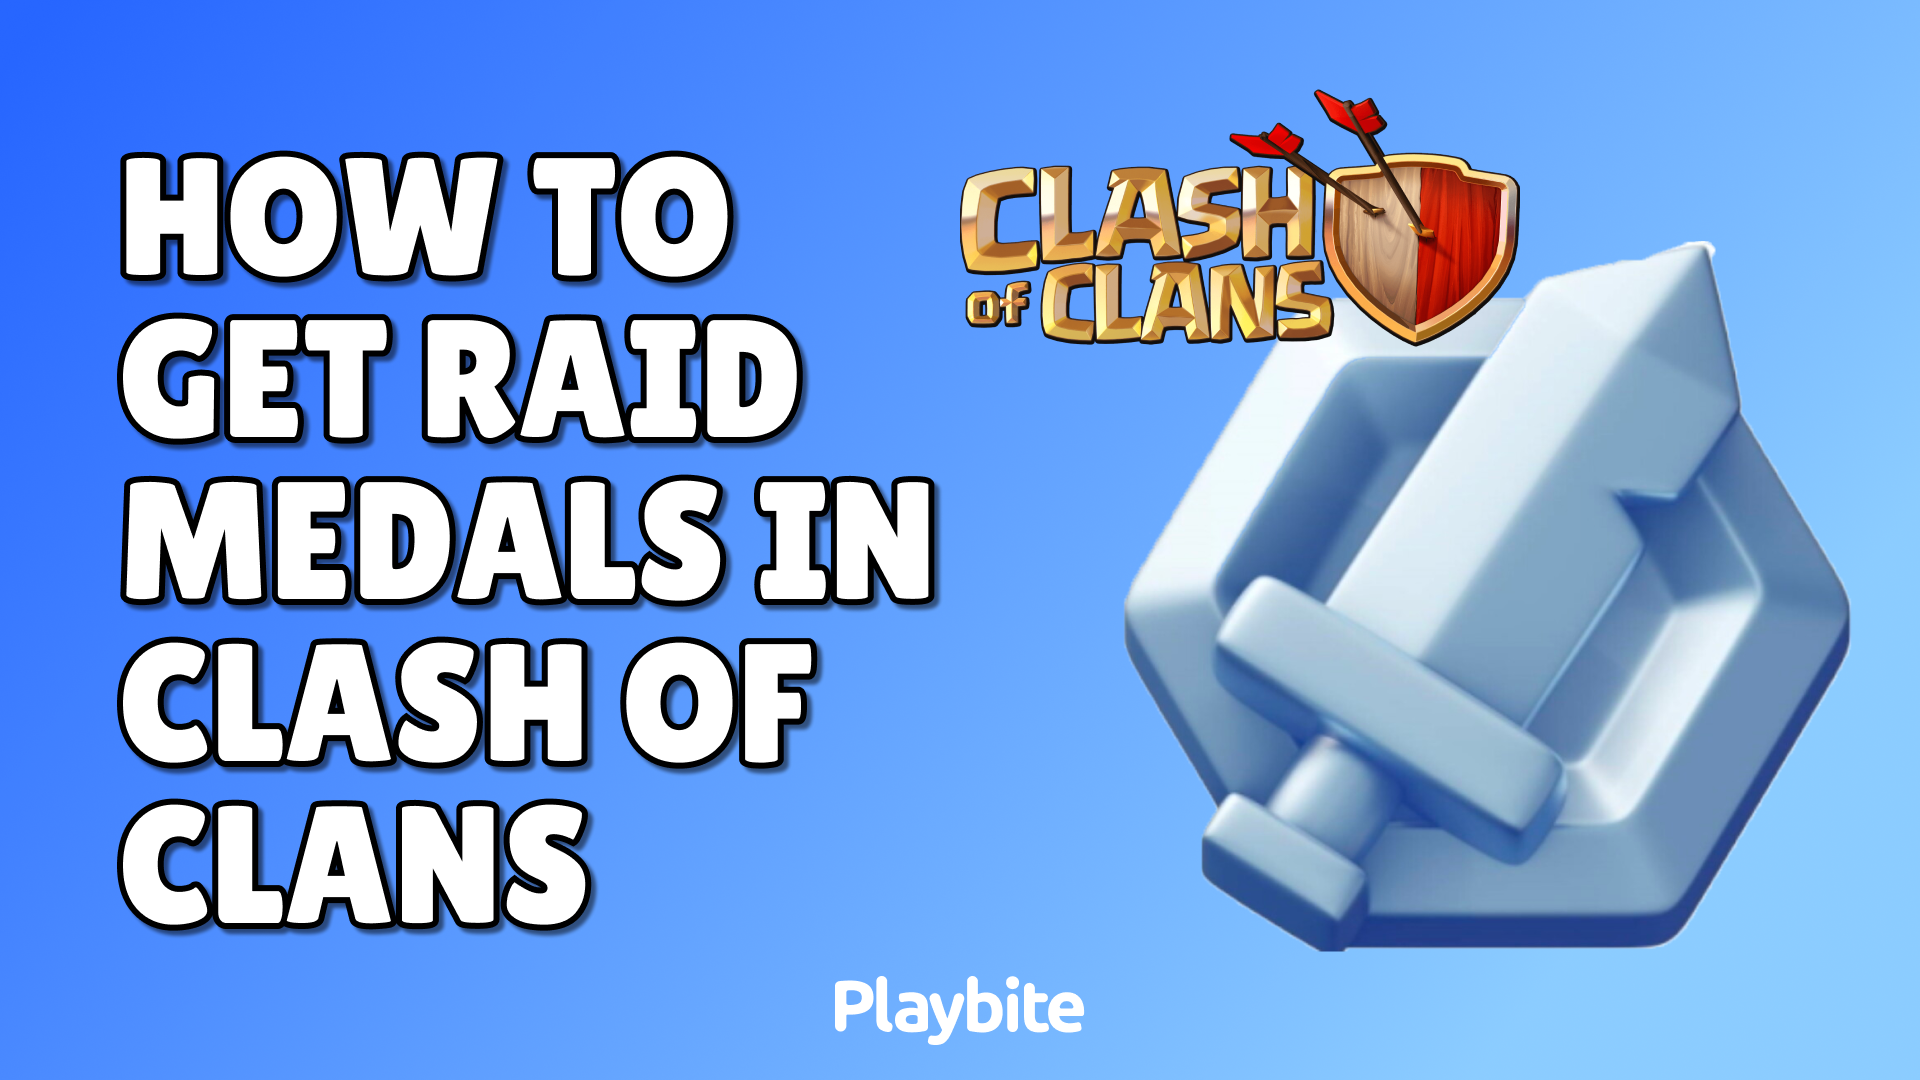 How To Get Raid Medals In Clash of Clans